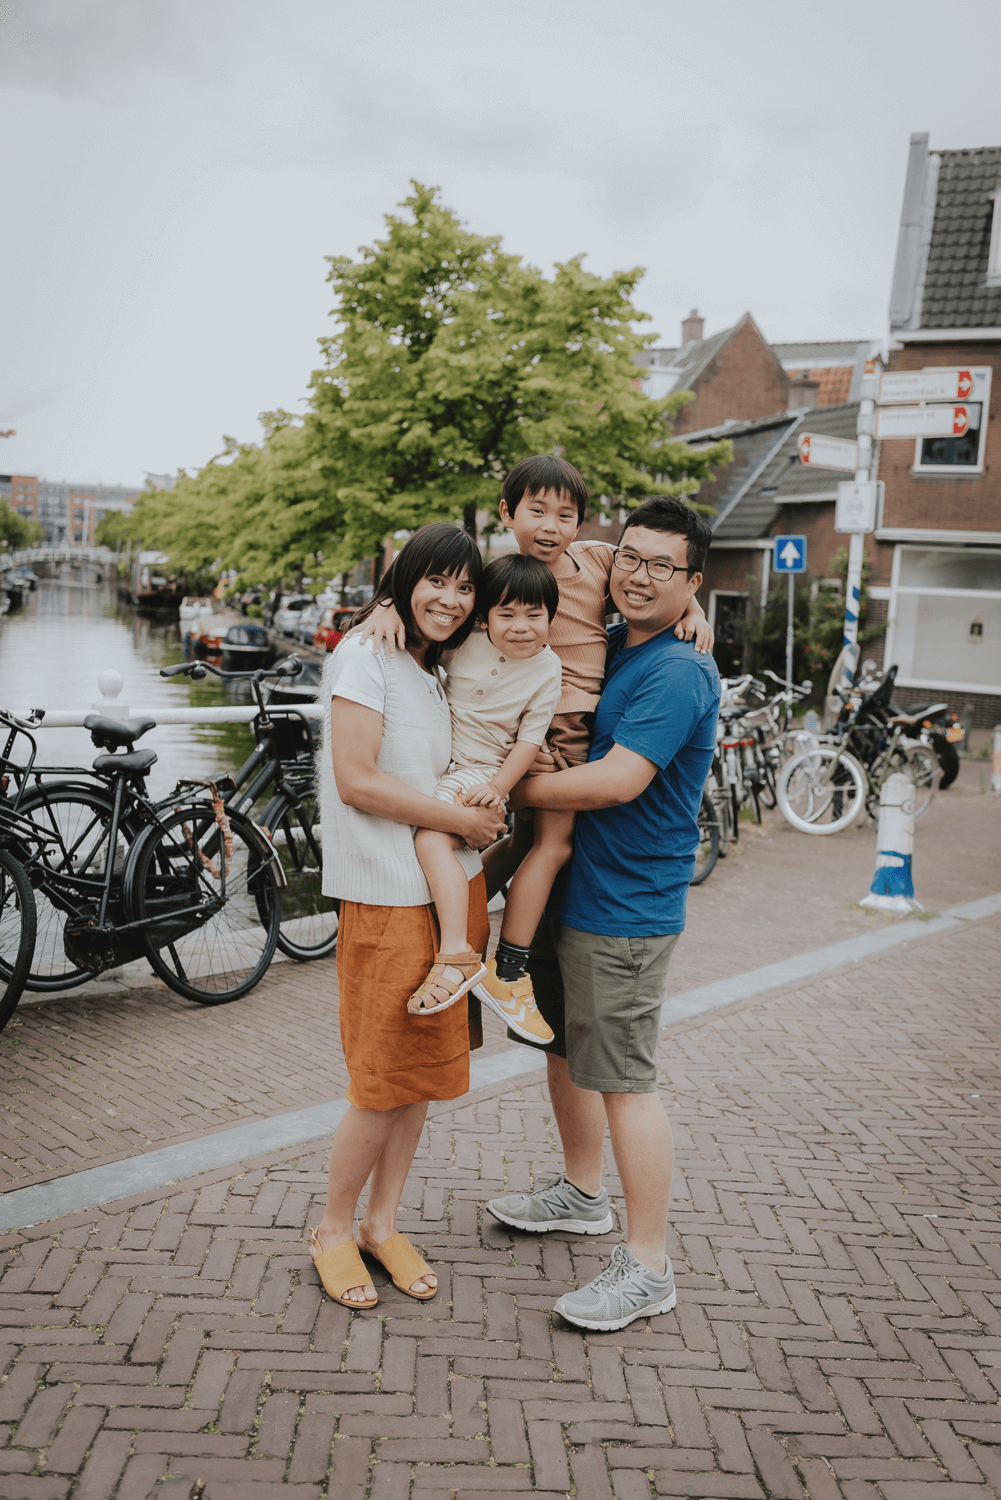 Summer holiday photos in Haarlem by Vicky McLachlan Photography_15